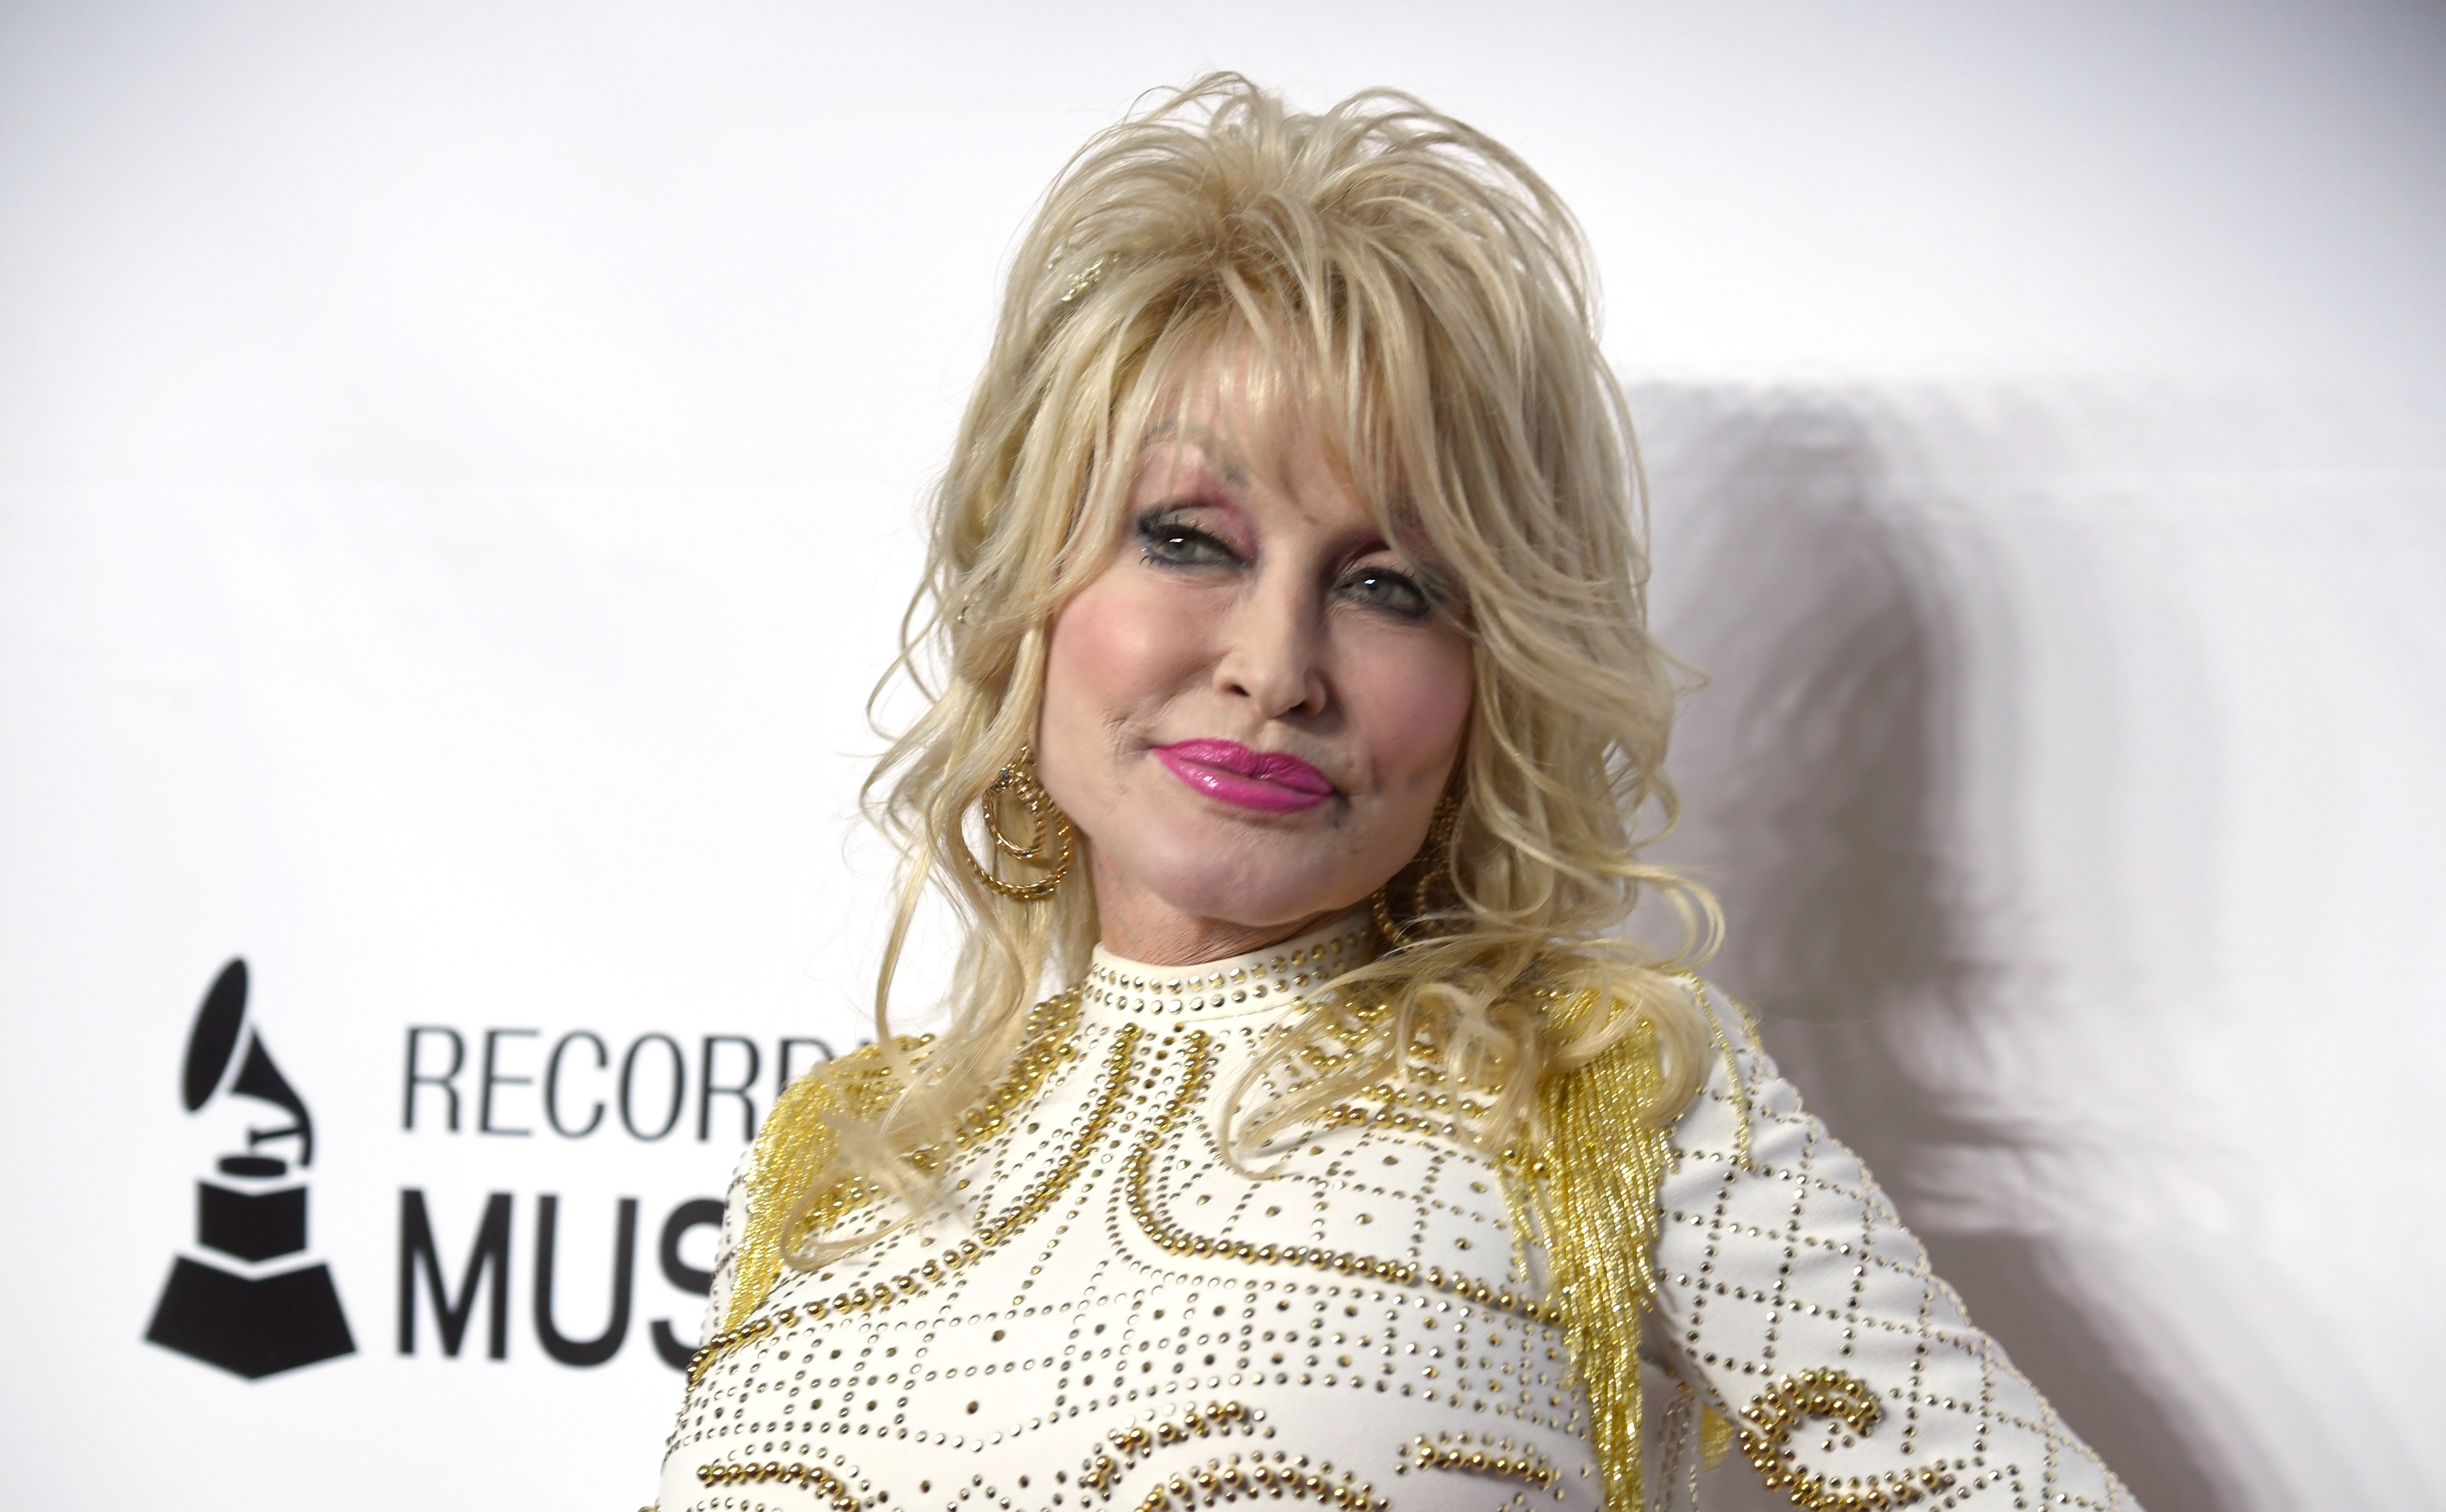 Dolly Parton attends MusiCares Person of the Year honoring Dolly Parton at Los Angeles Convention Center on February 8, 2019.